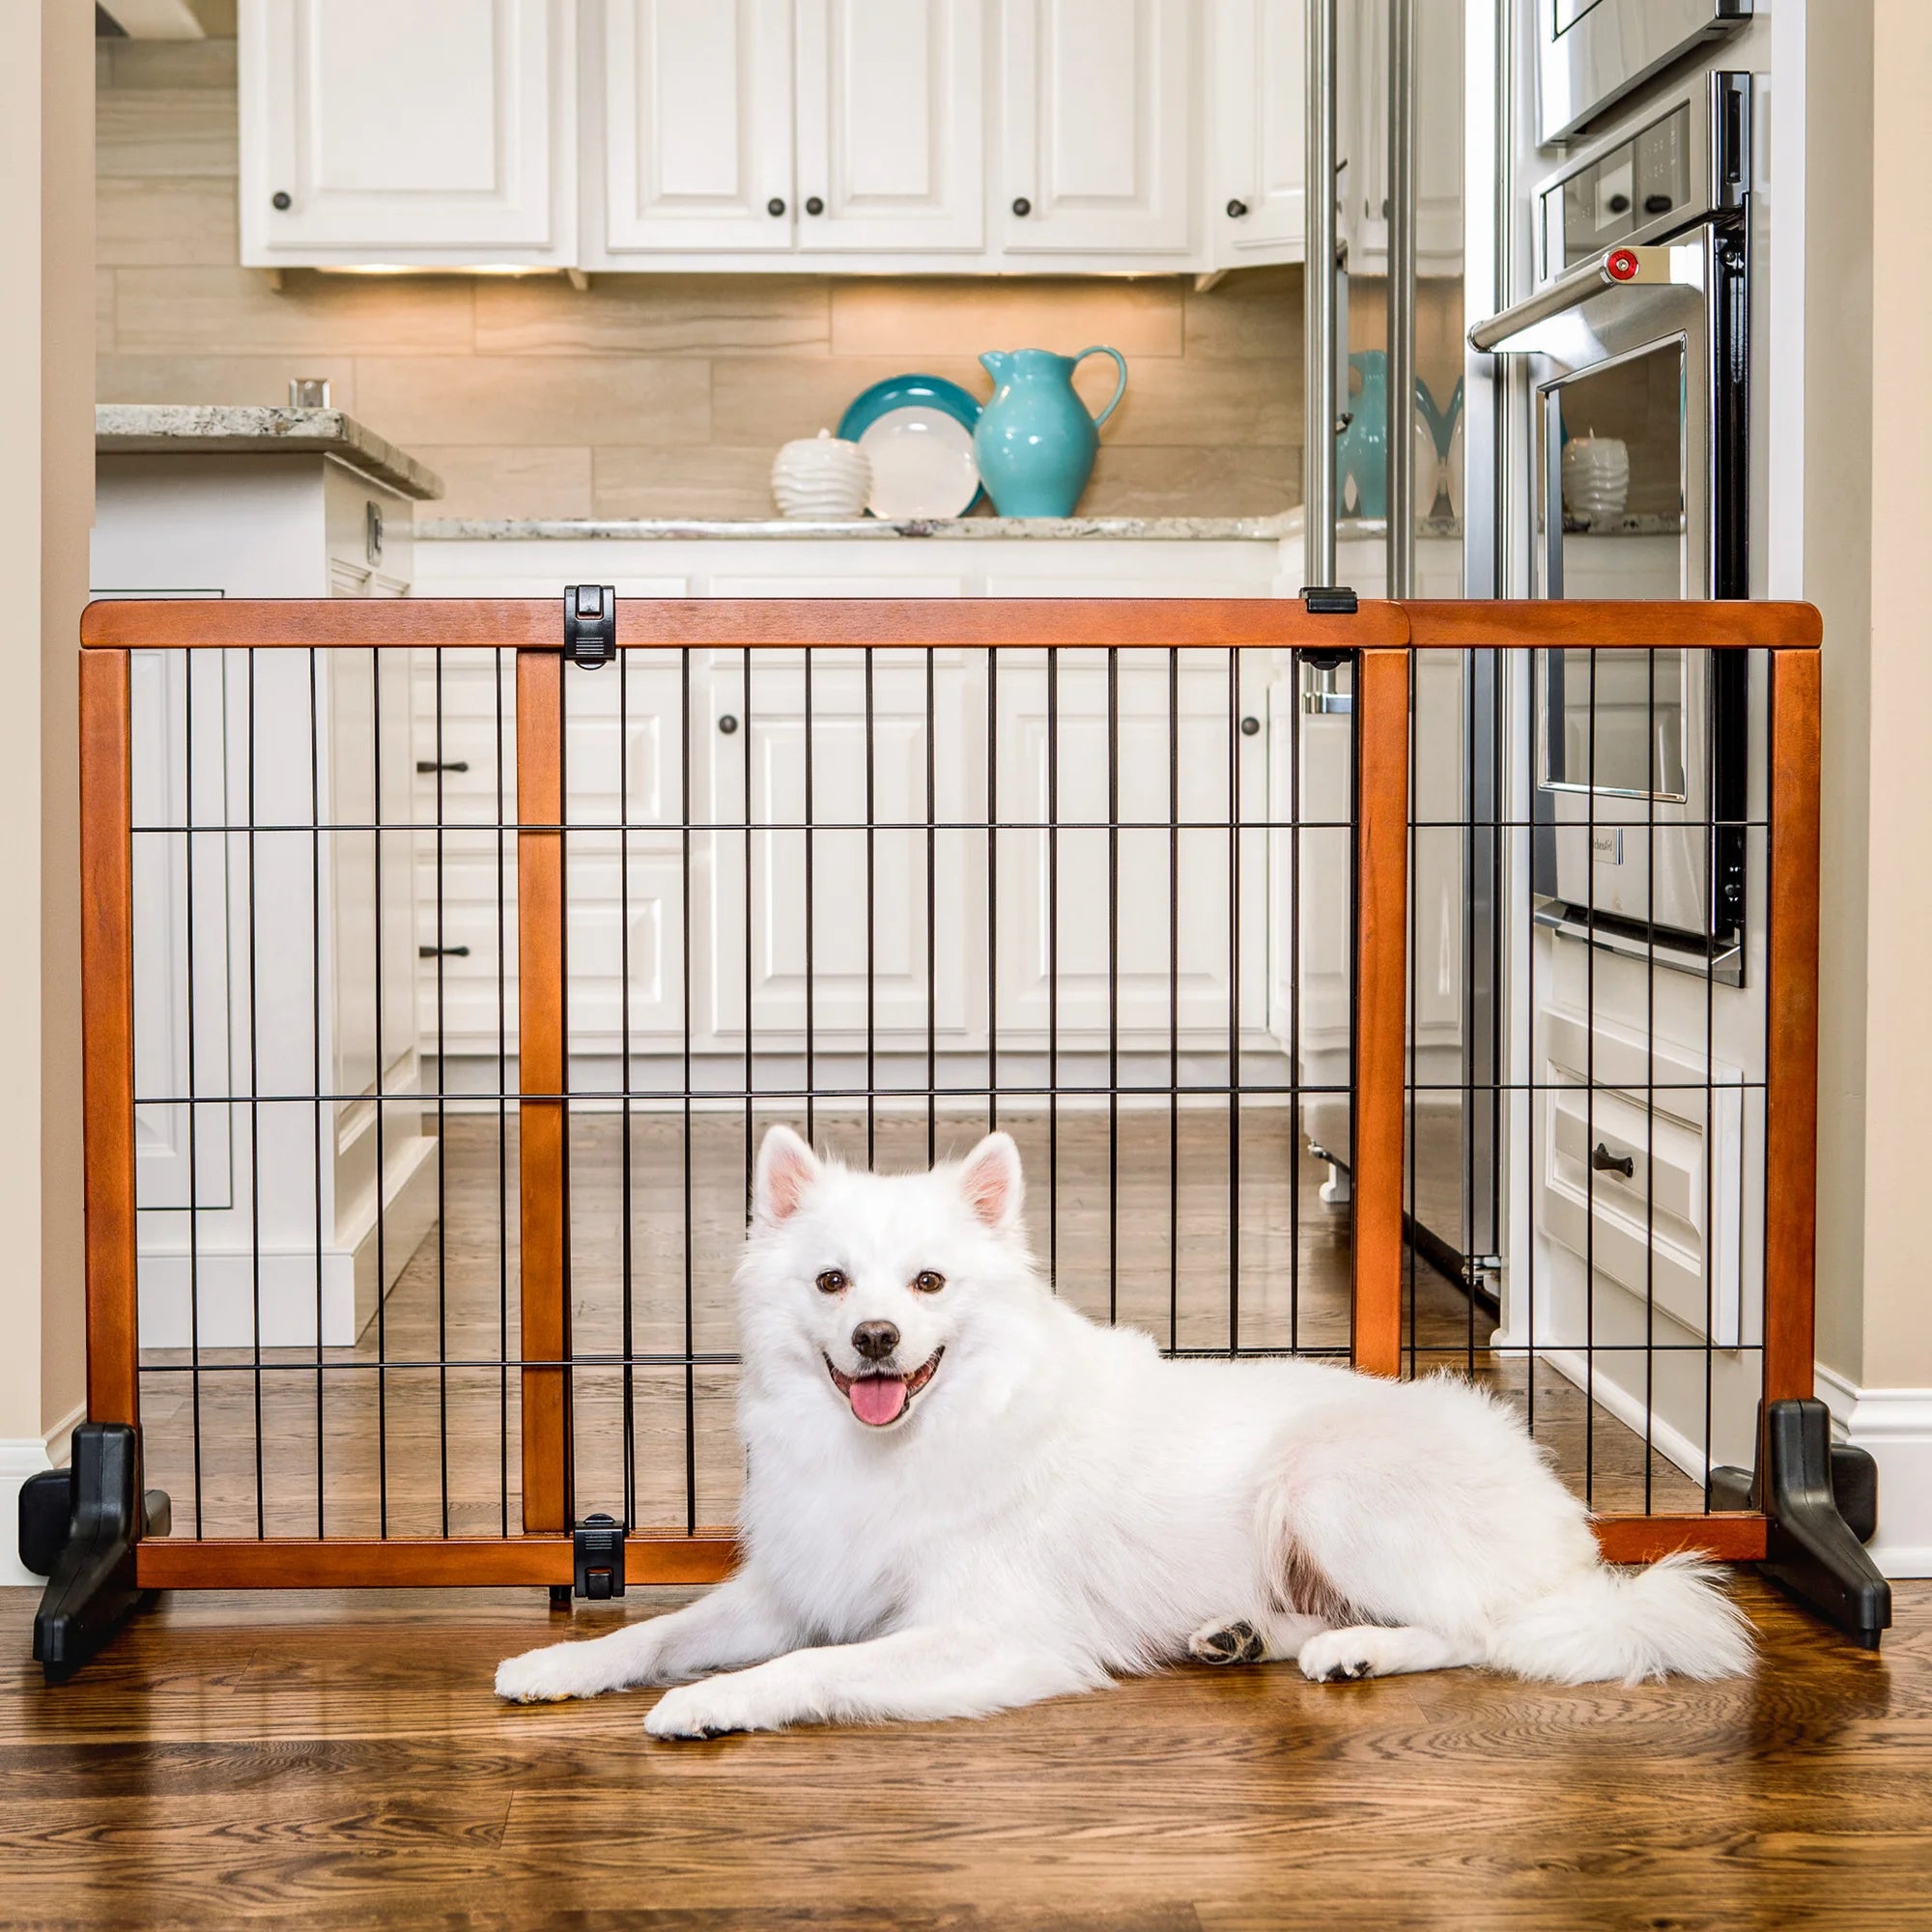 Dog sitting in front of the Design Paw Extra Tall Extra Wide Freestanding Pet Gate in a kitchen.